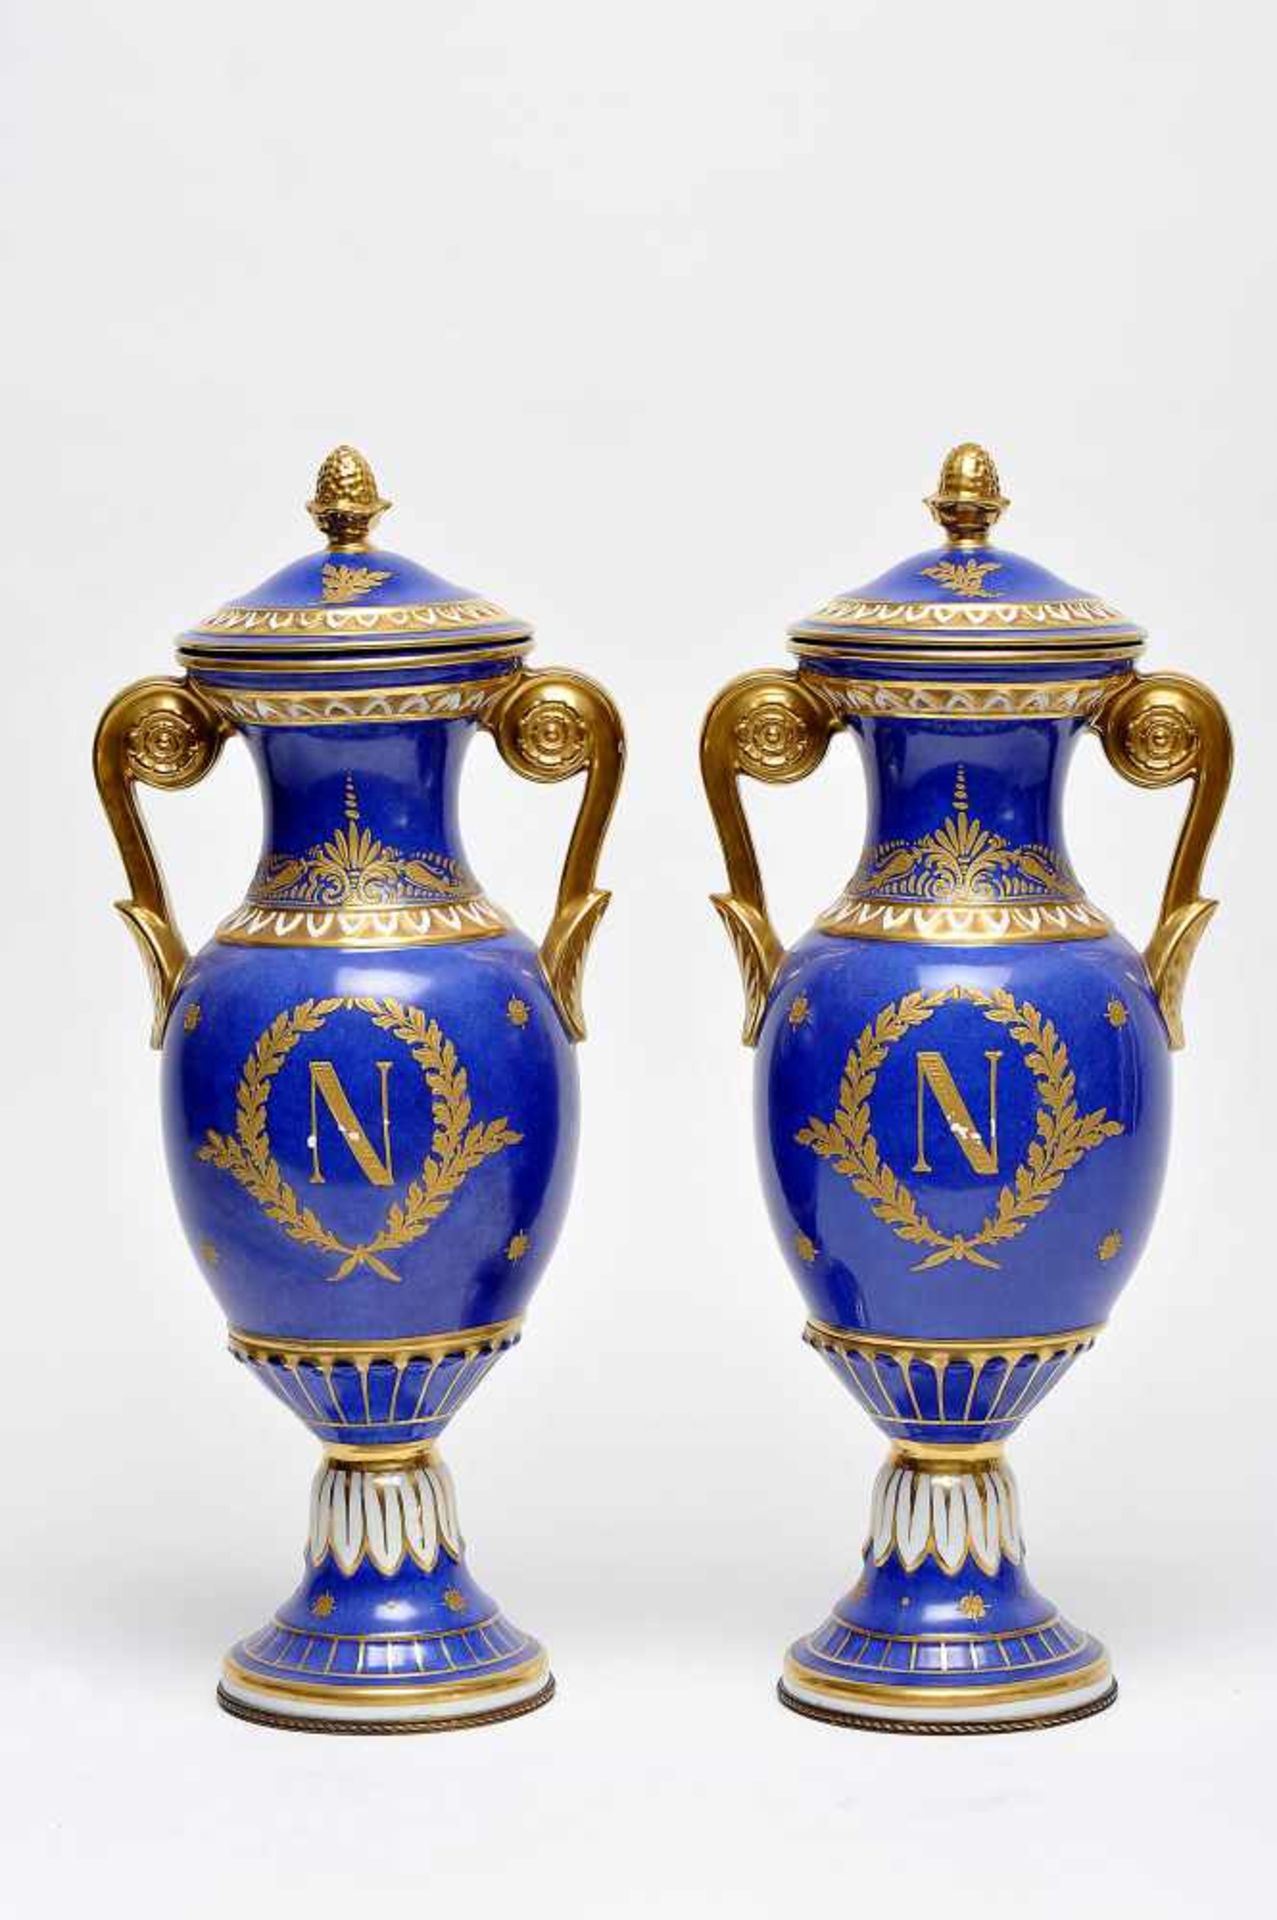 A Pair of Covered Urns, Sèvres porcelain, blue and gilt decoration "Eagle" and "N" (for Napoleon), - Bild 2 aus 3